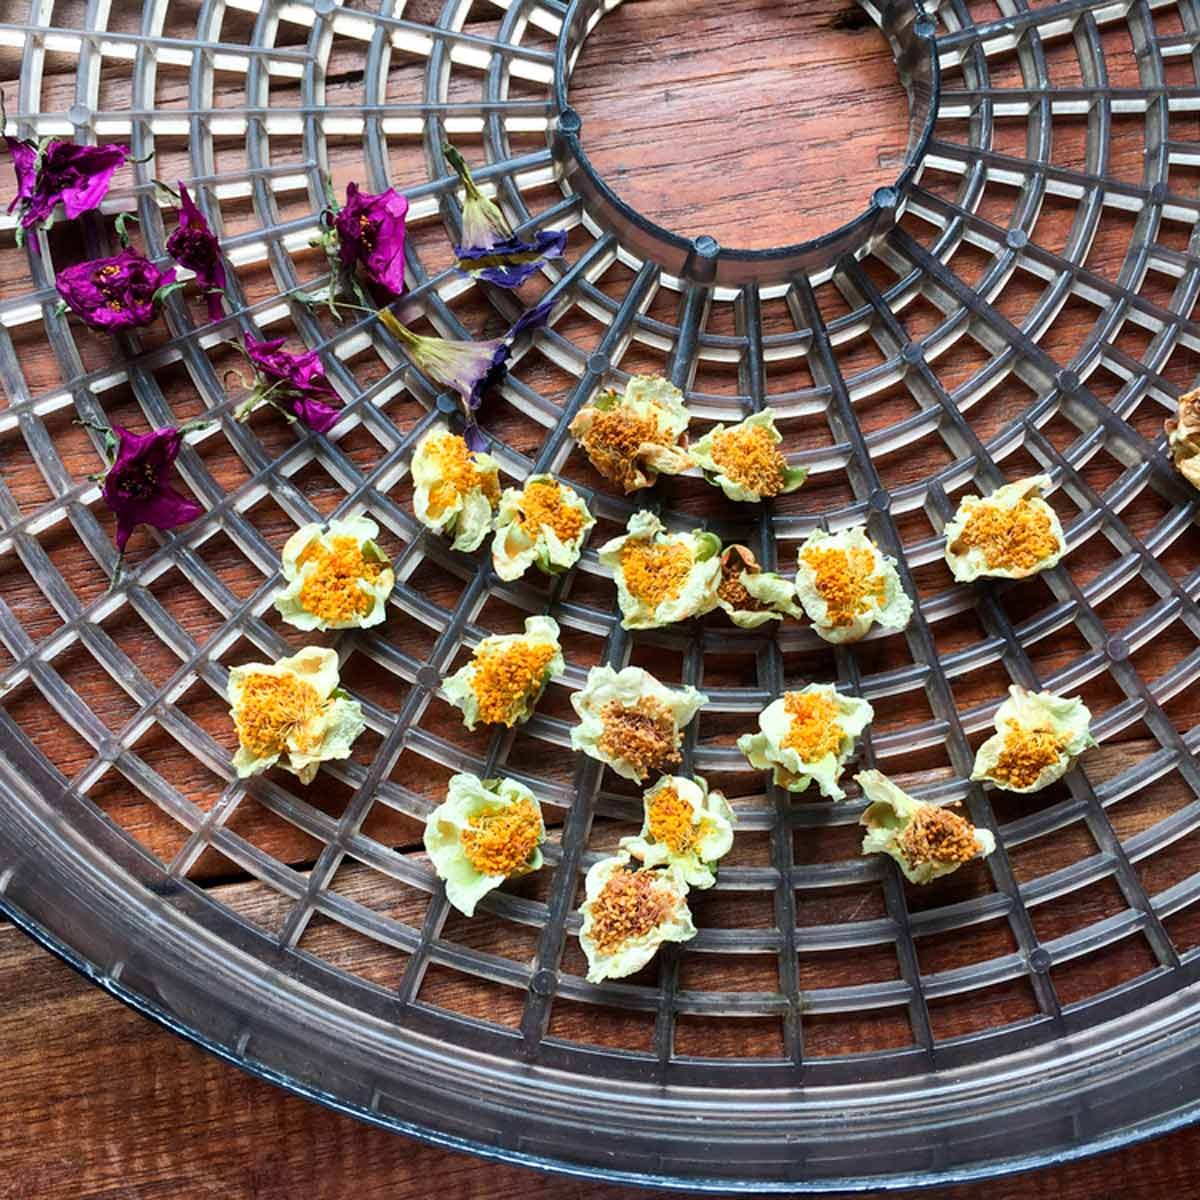 How to Use a Food Dehydrator